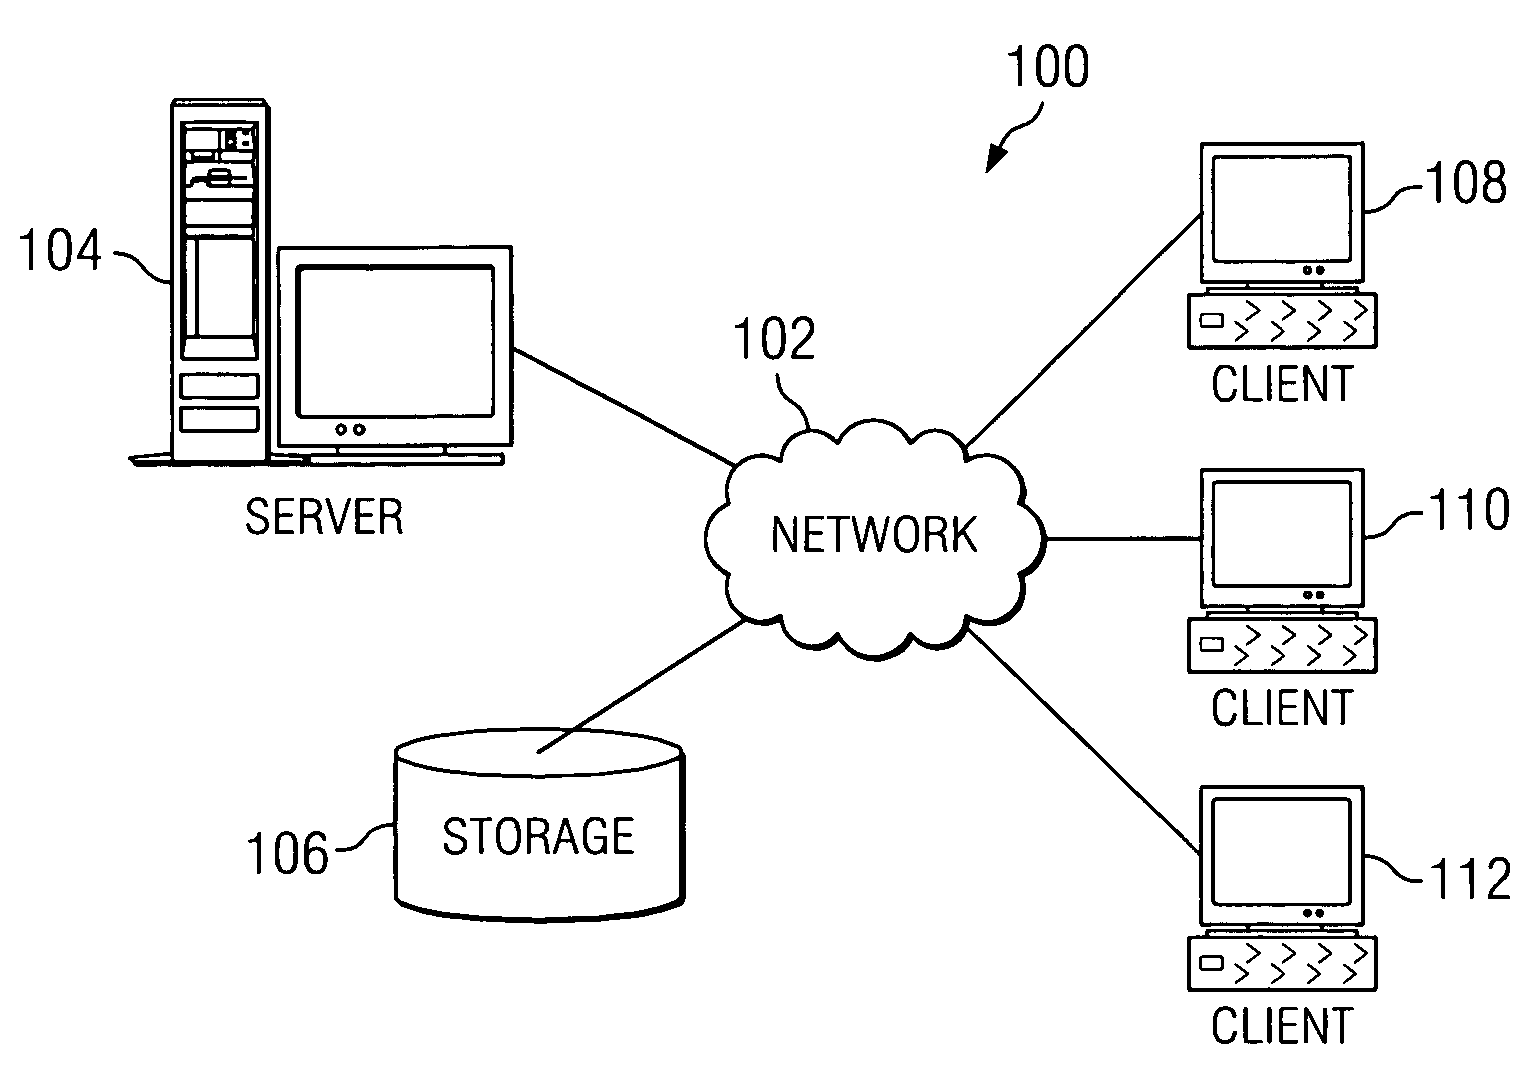 Method for extending the CRTM in a trusted platform